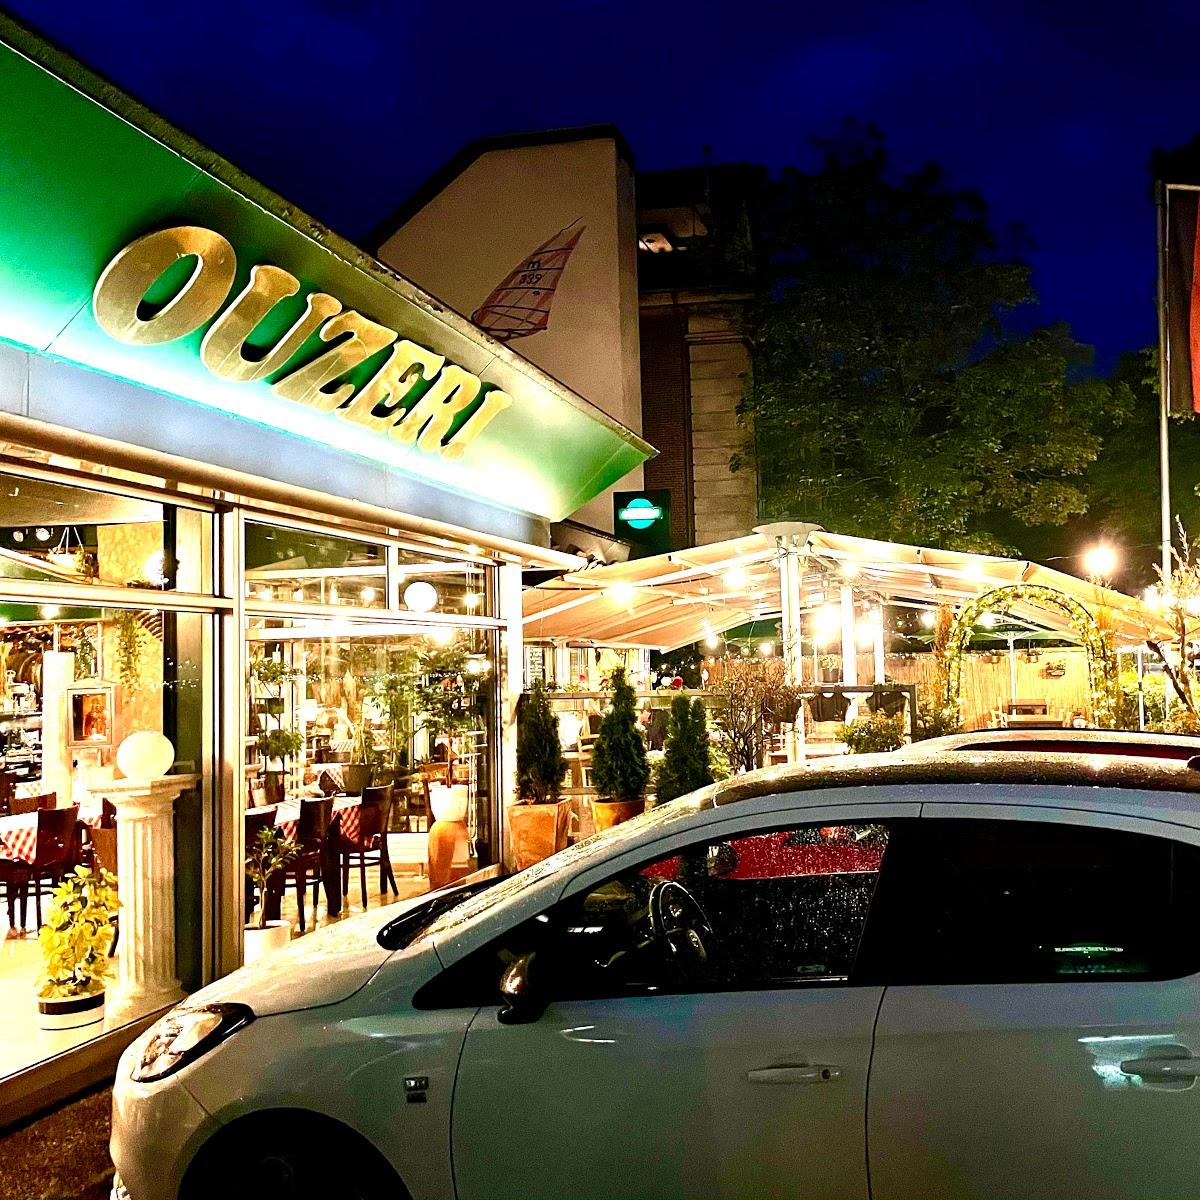 Restaurant "Ouzeri" in Hannover